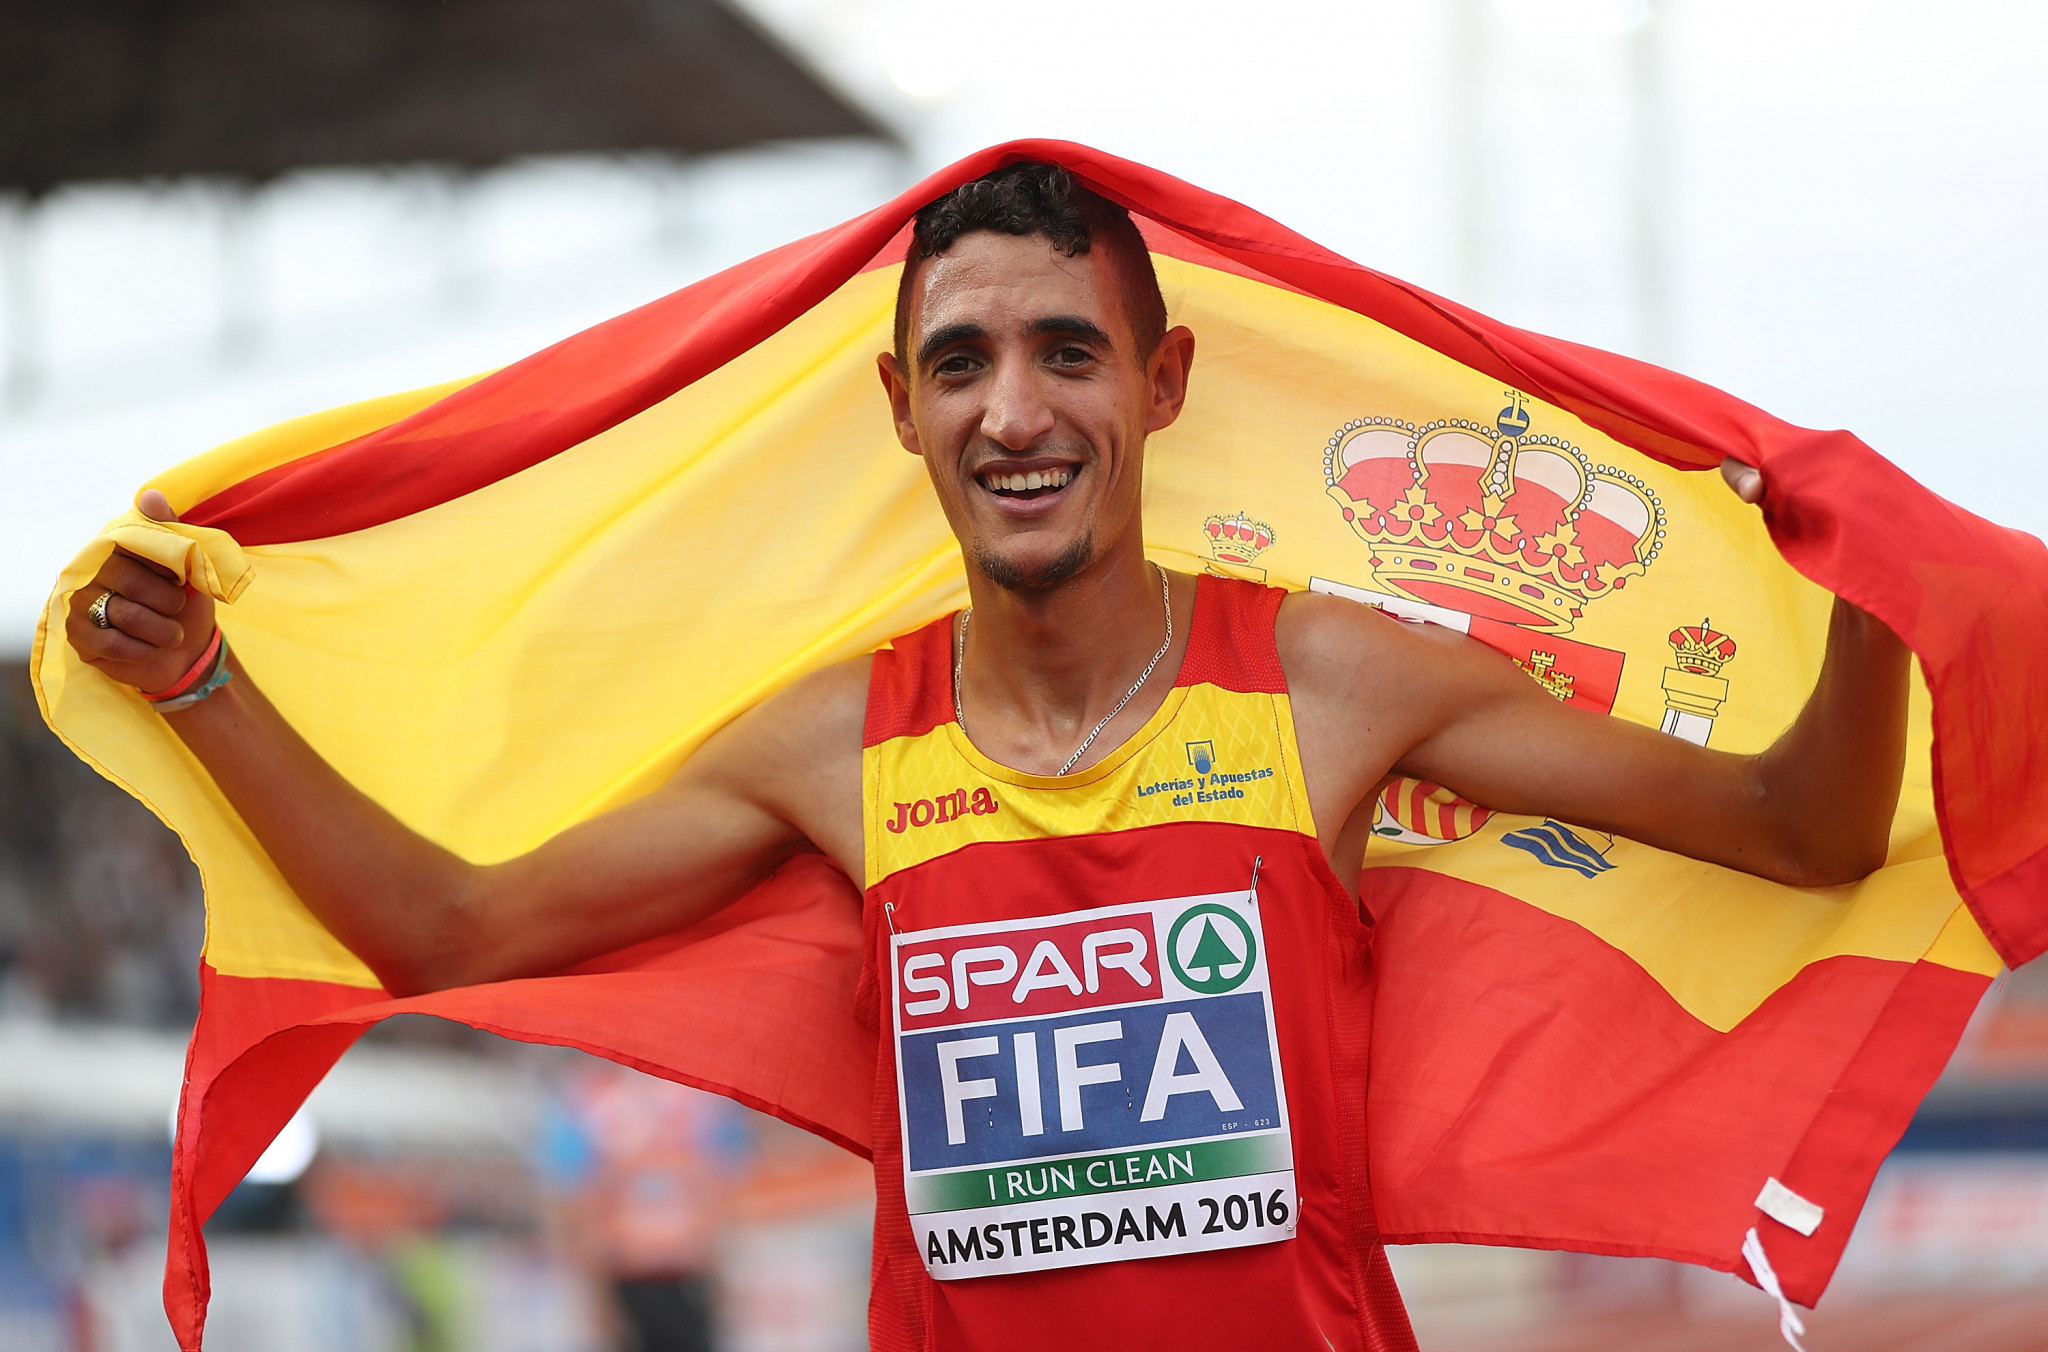 Reigning European 5,000 metres champion Ilias Fifa has been arrested in Barcelona for suspected links to a doping ring ©Getty Images